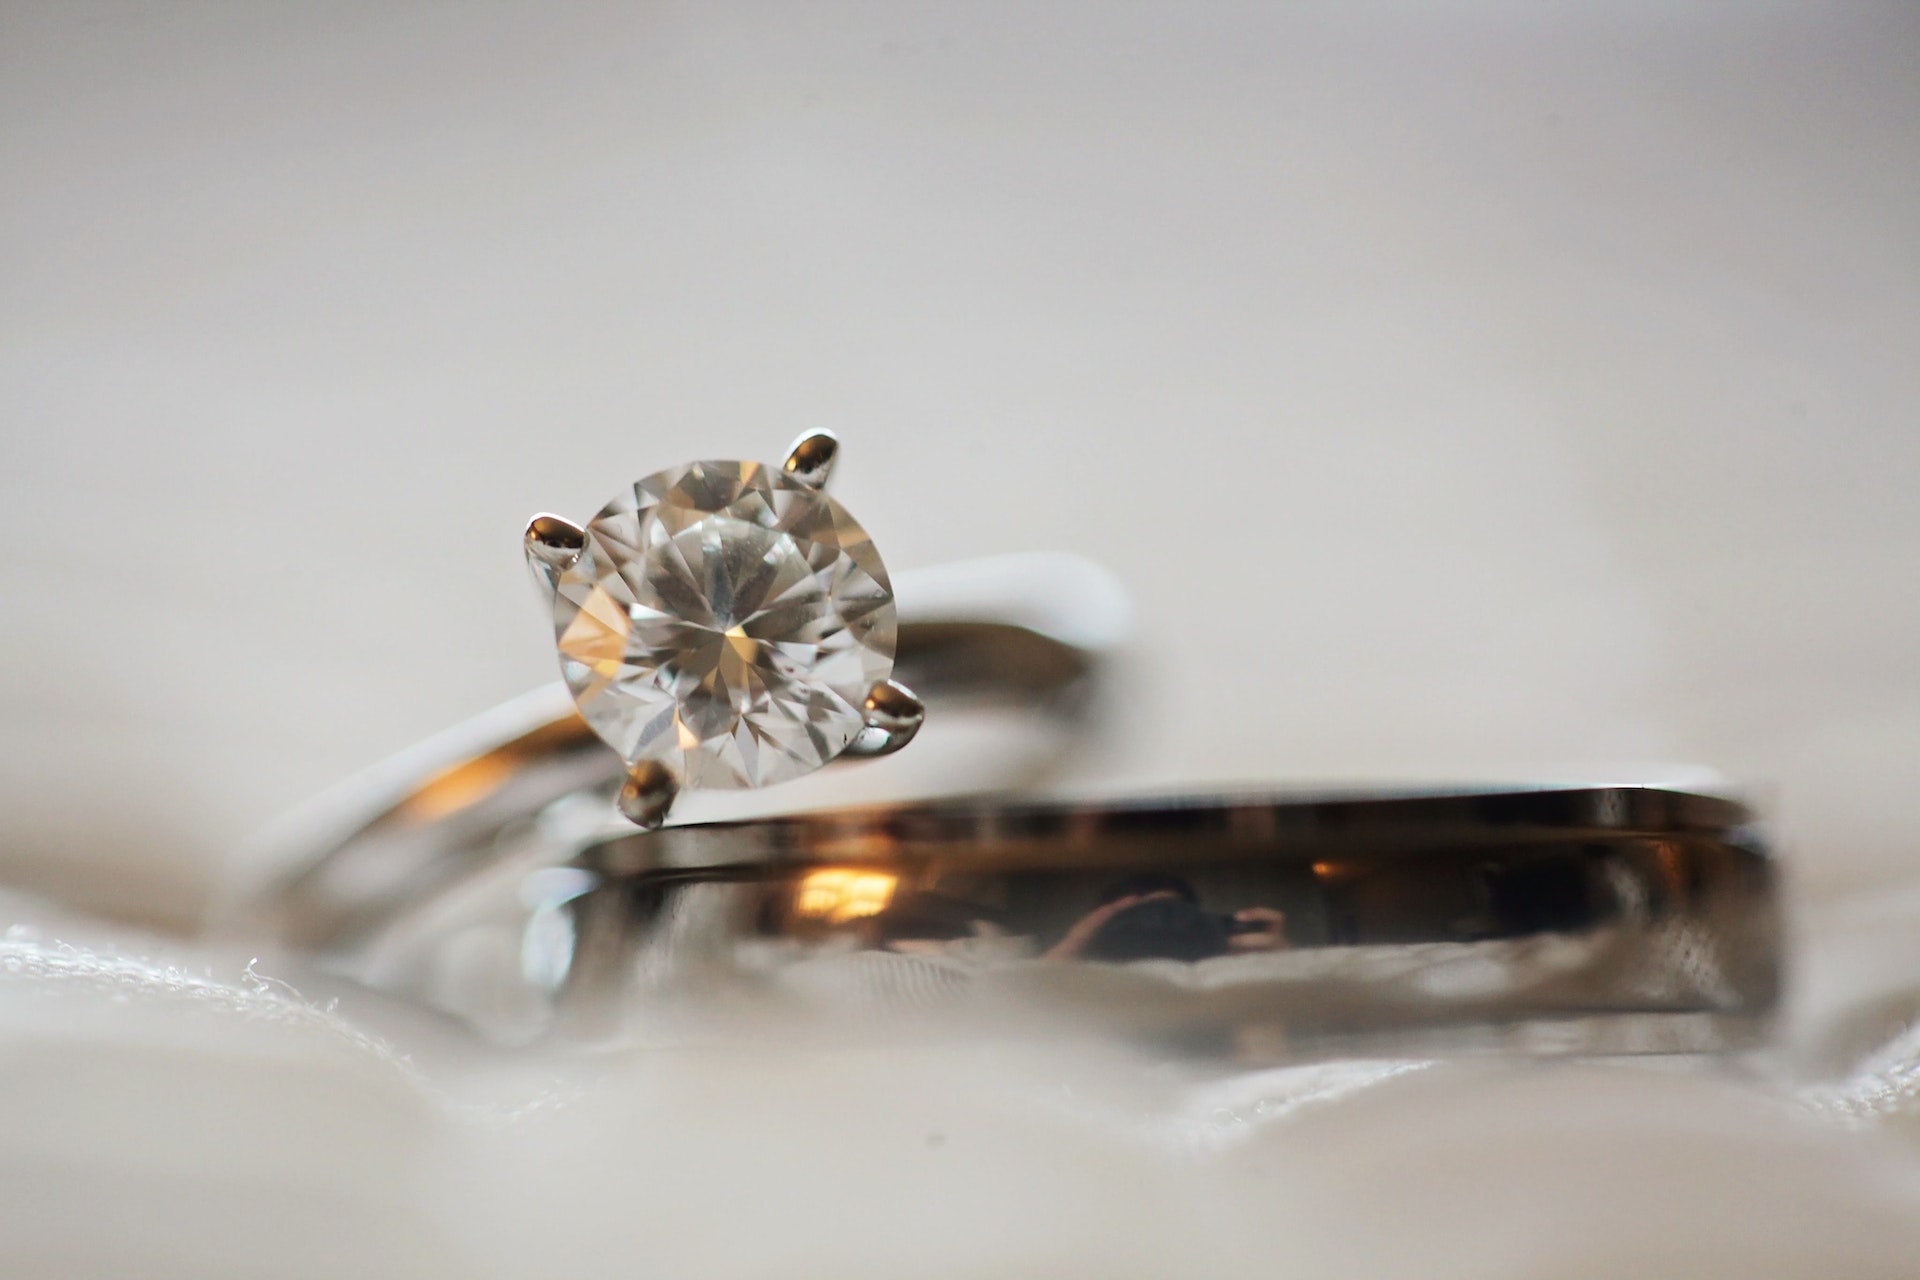 Diamond ring for the article on lab-grown diamonds.